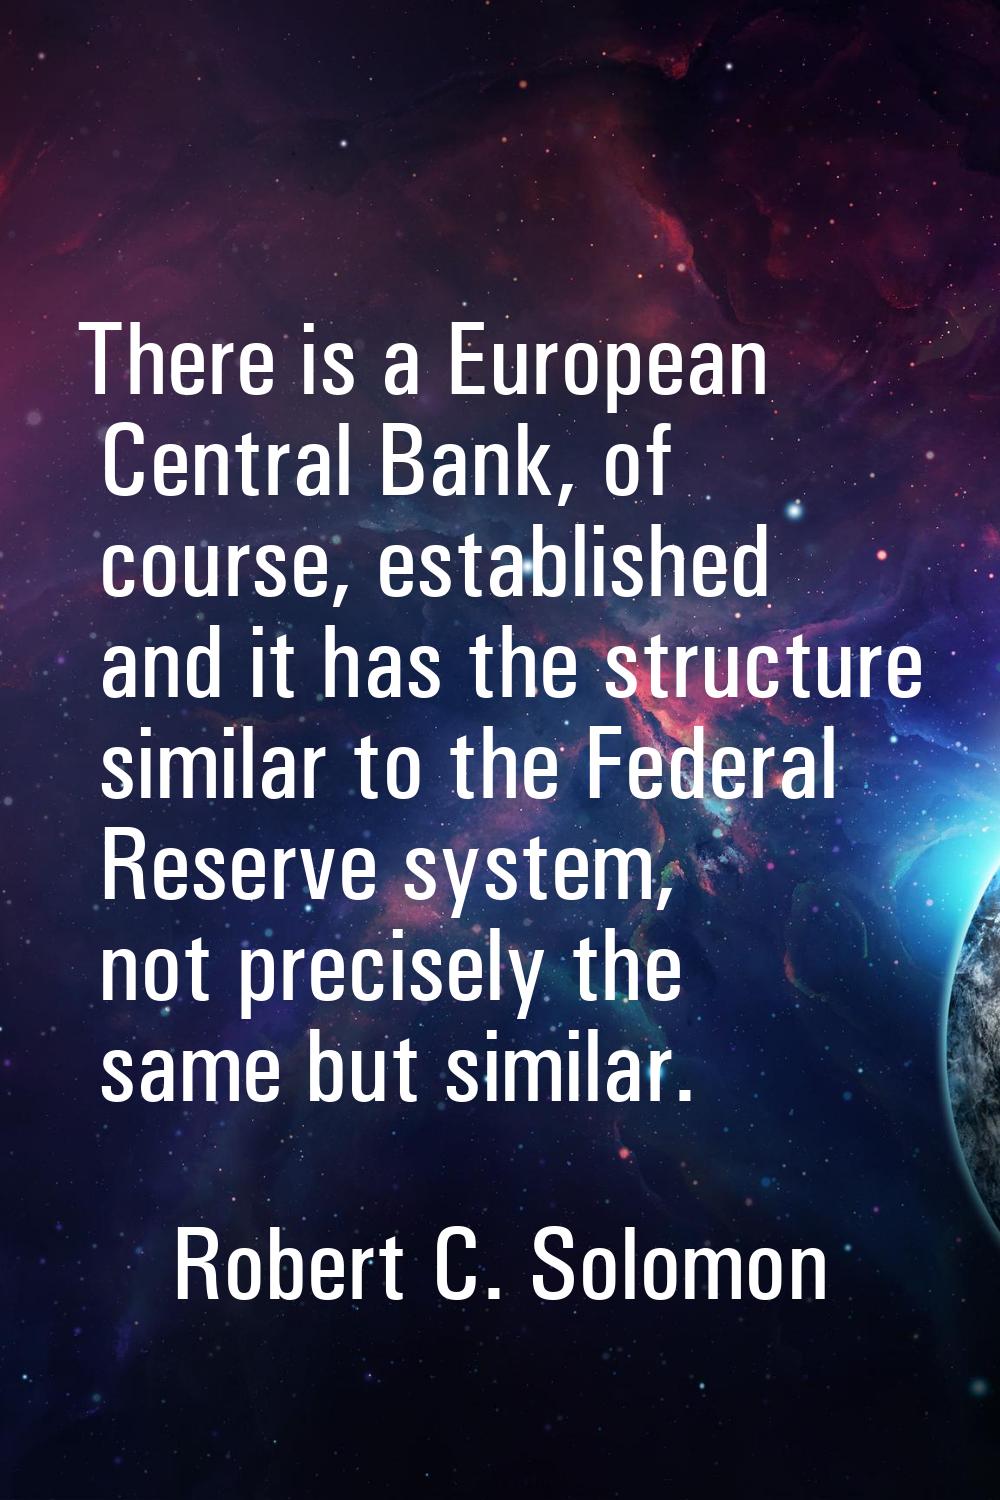 There is a European Central Bank, of course, established and it has the structure similar to the Fe